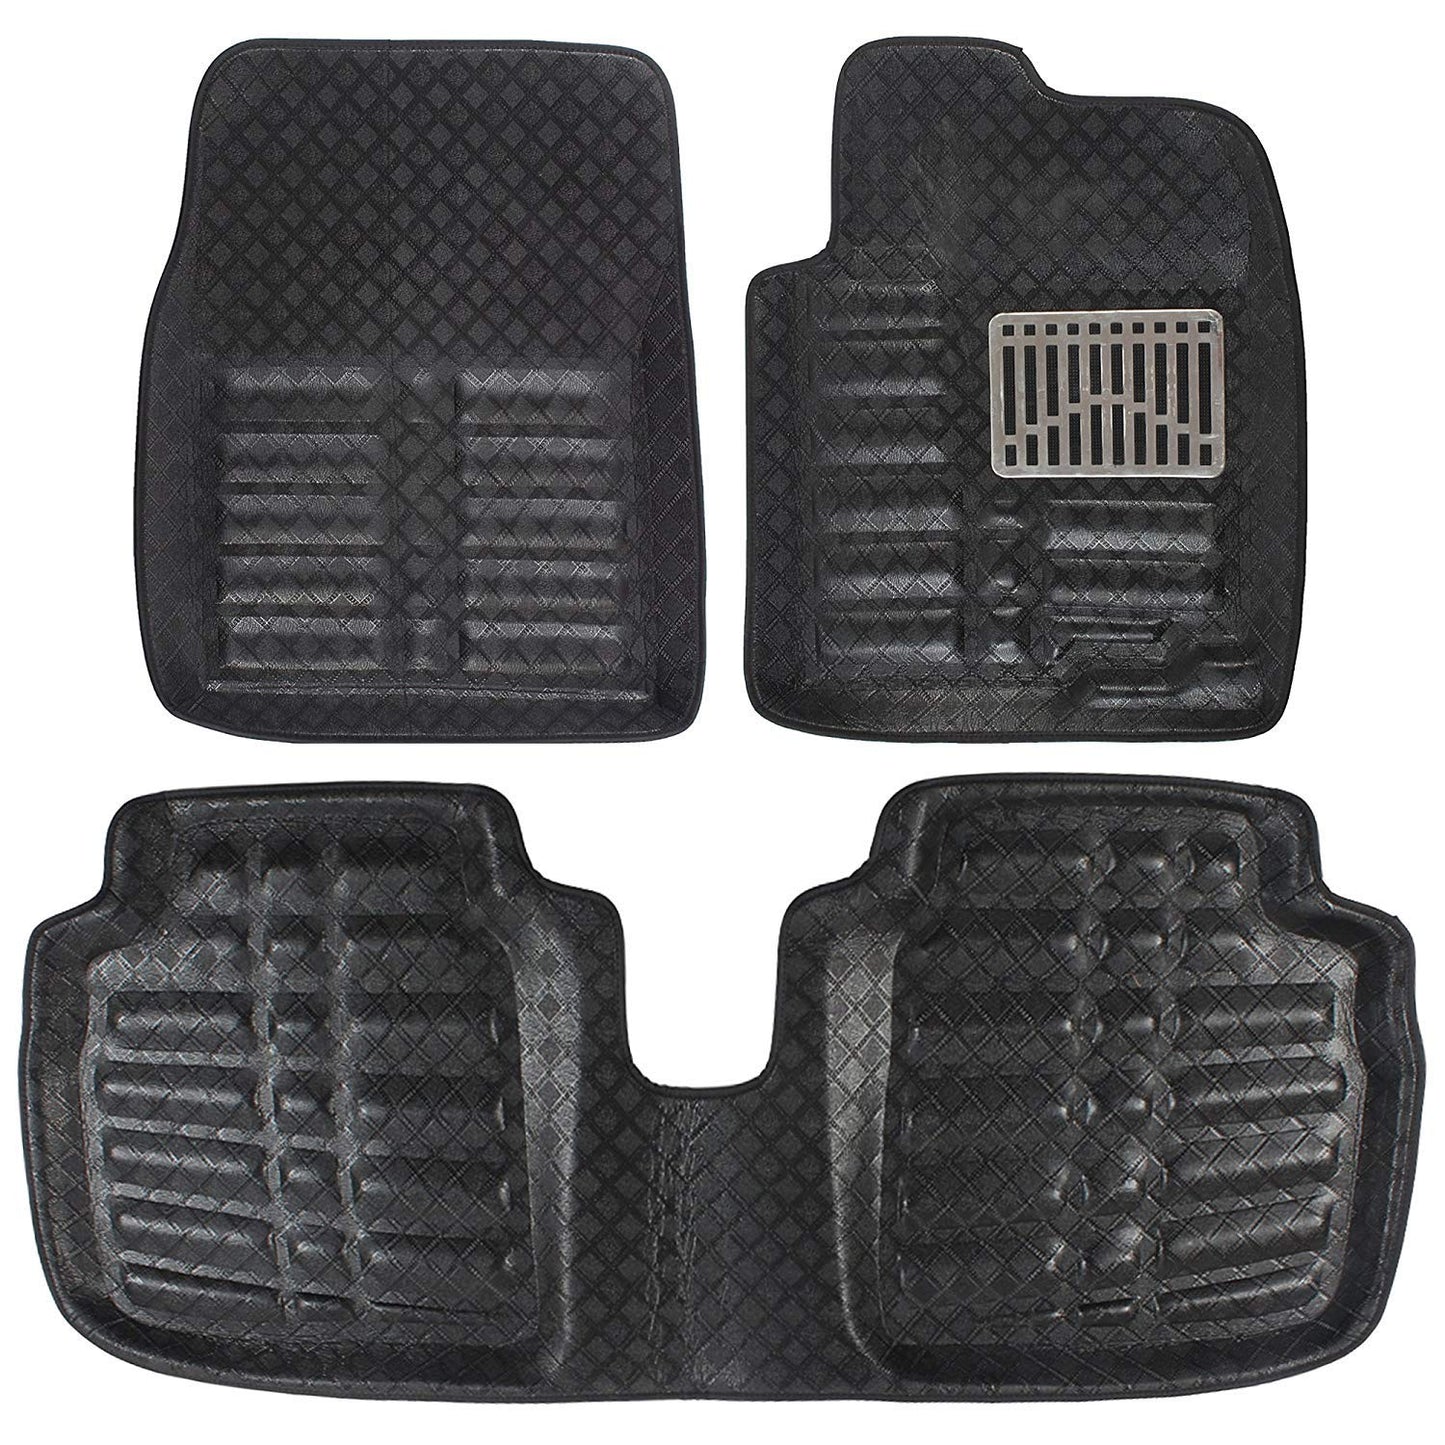 Oshotto 4D Artificial Leather Car Floor Mats For Nissan Terrano - Set of 3 (2 pcs Front & one Long Single Rear pc) - Black